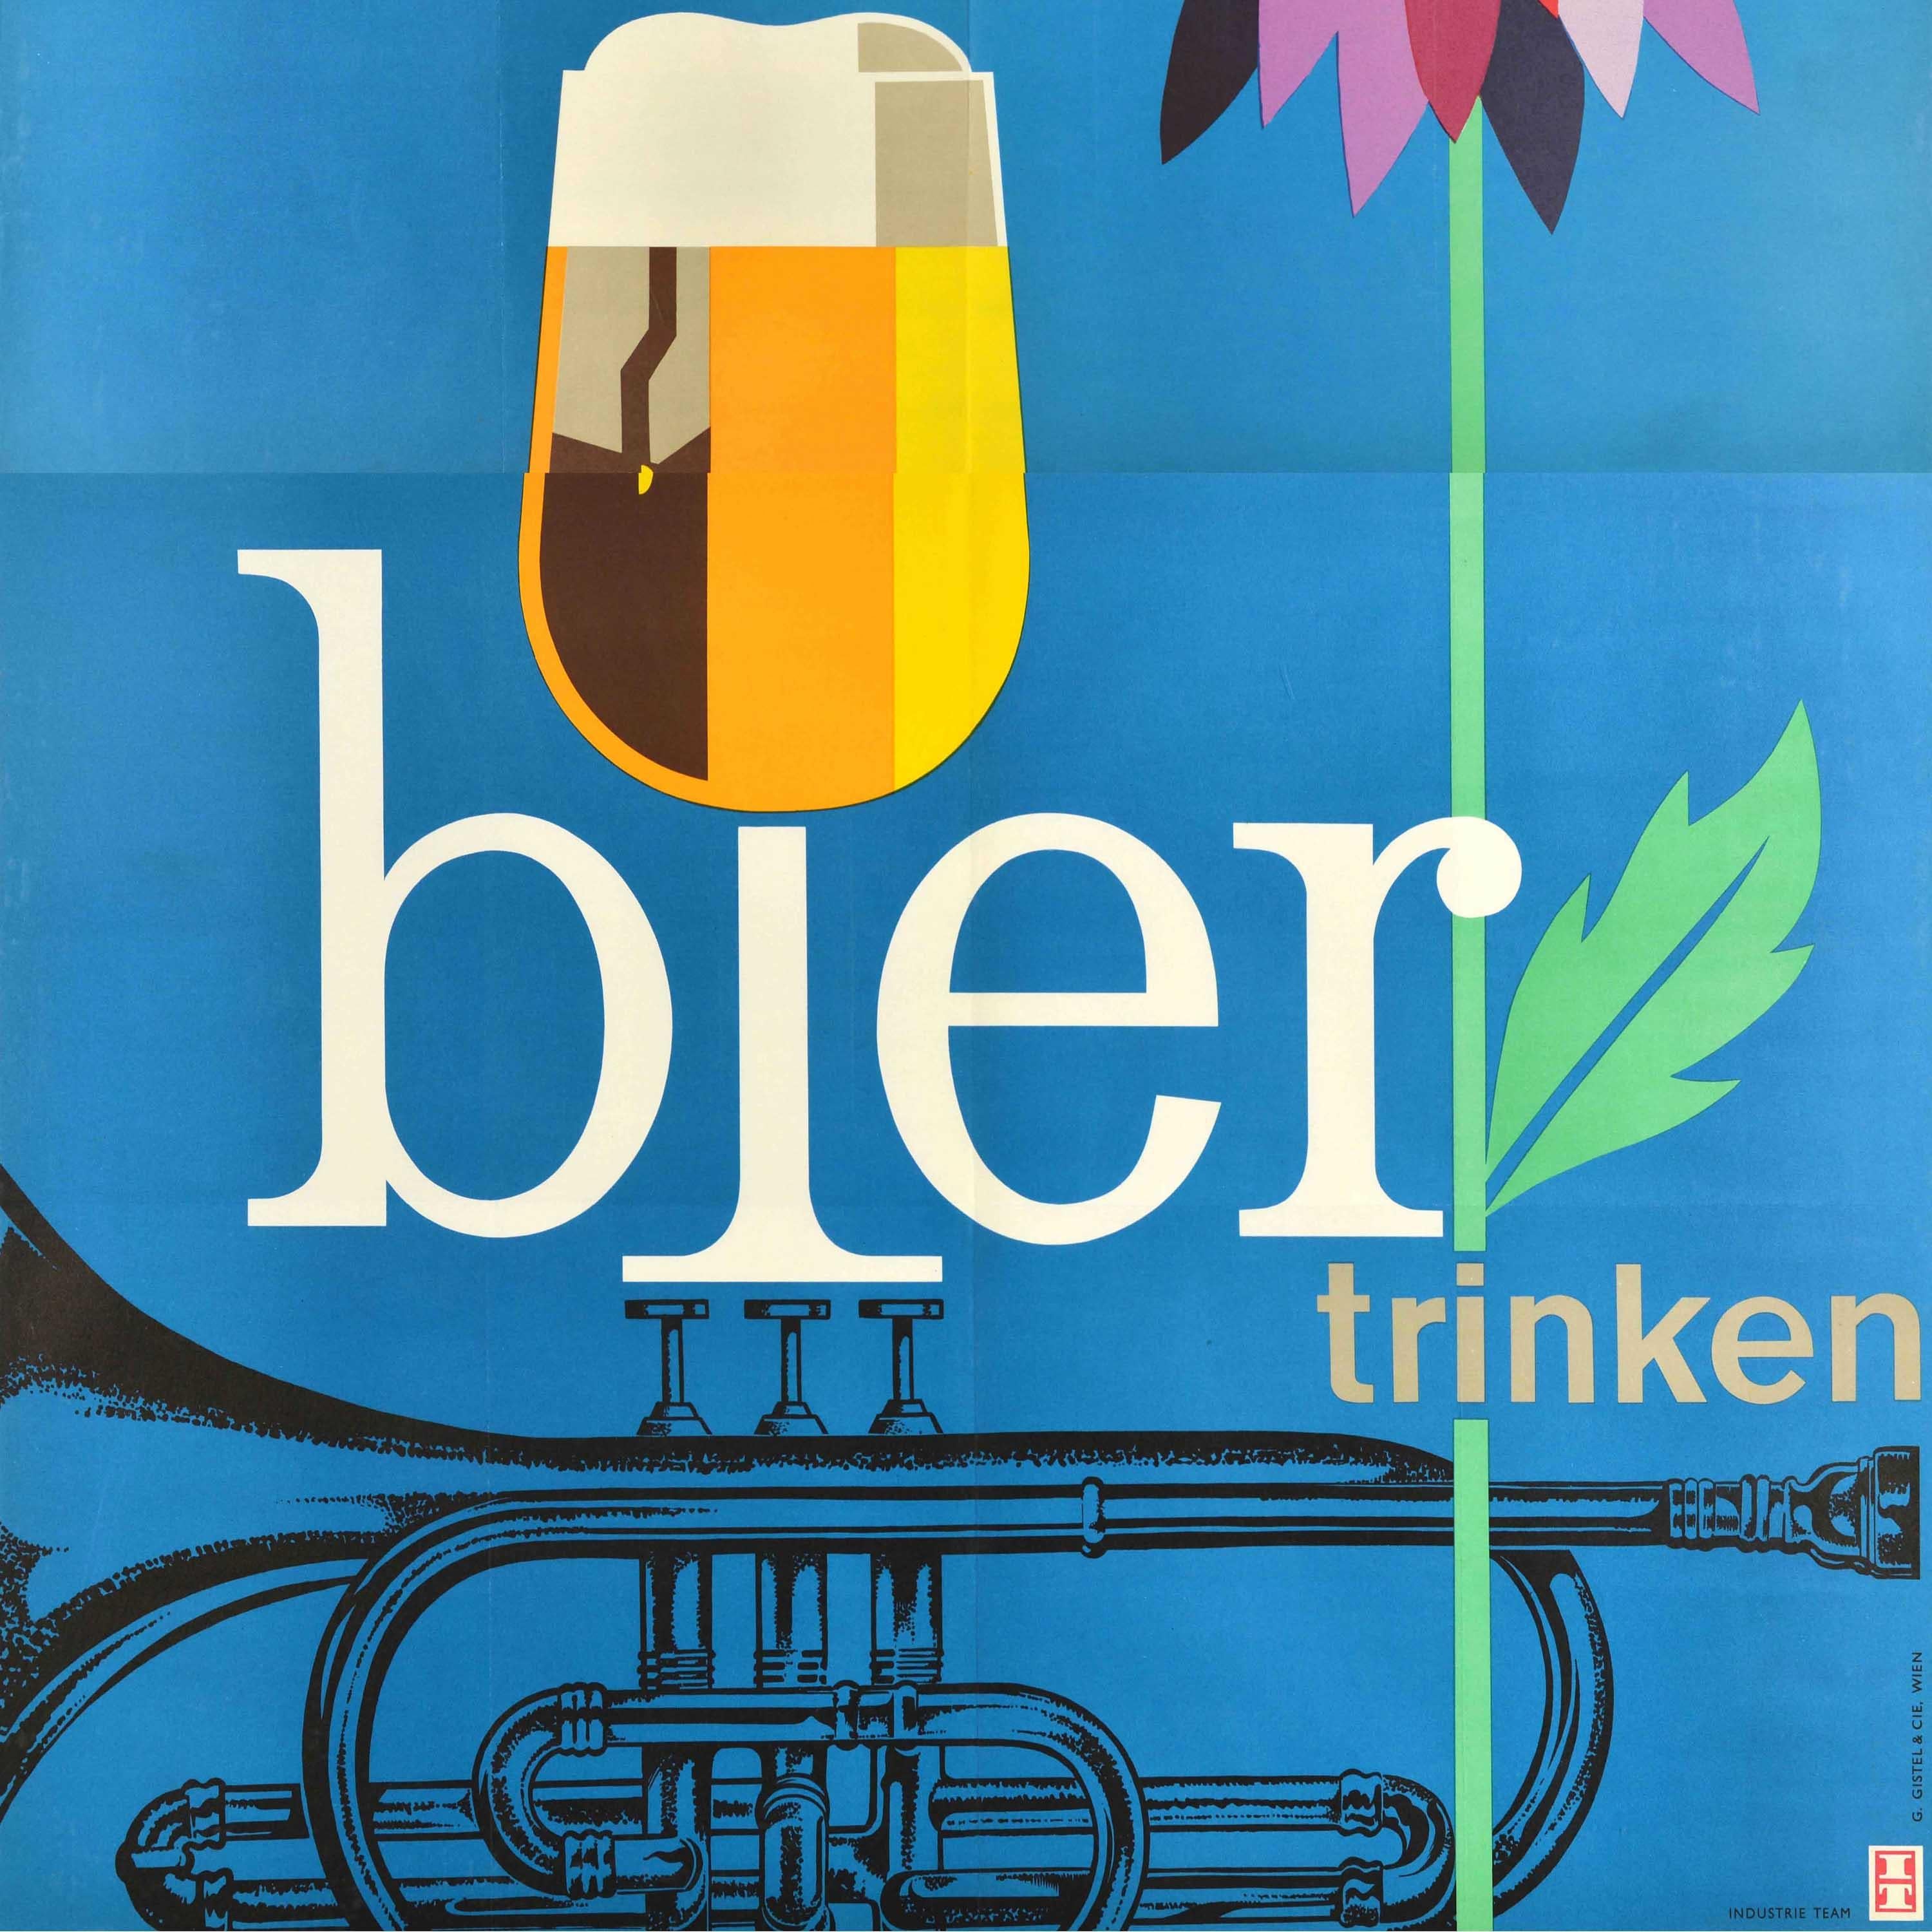 Original Vintage Advertising Poster Drink Beer Moderately Flower Trumpet Alcohol - Blue Print by Unknown